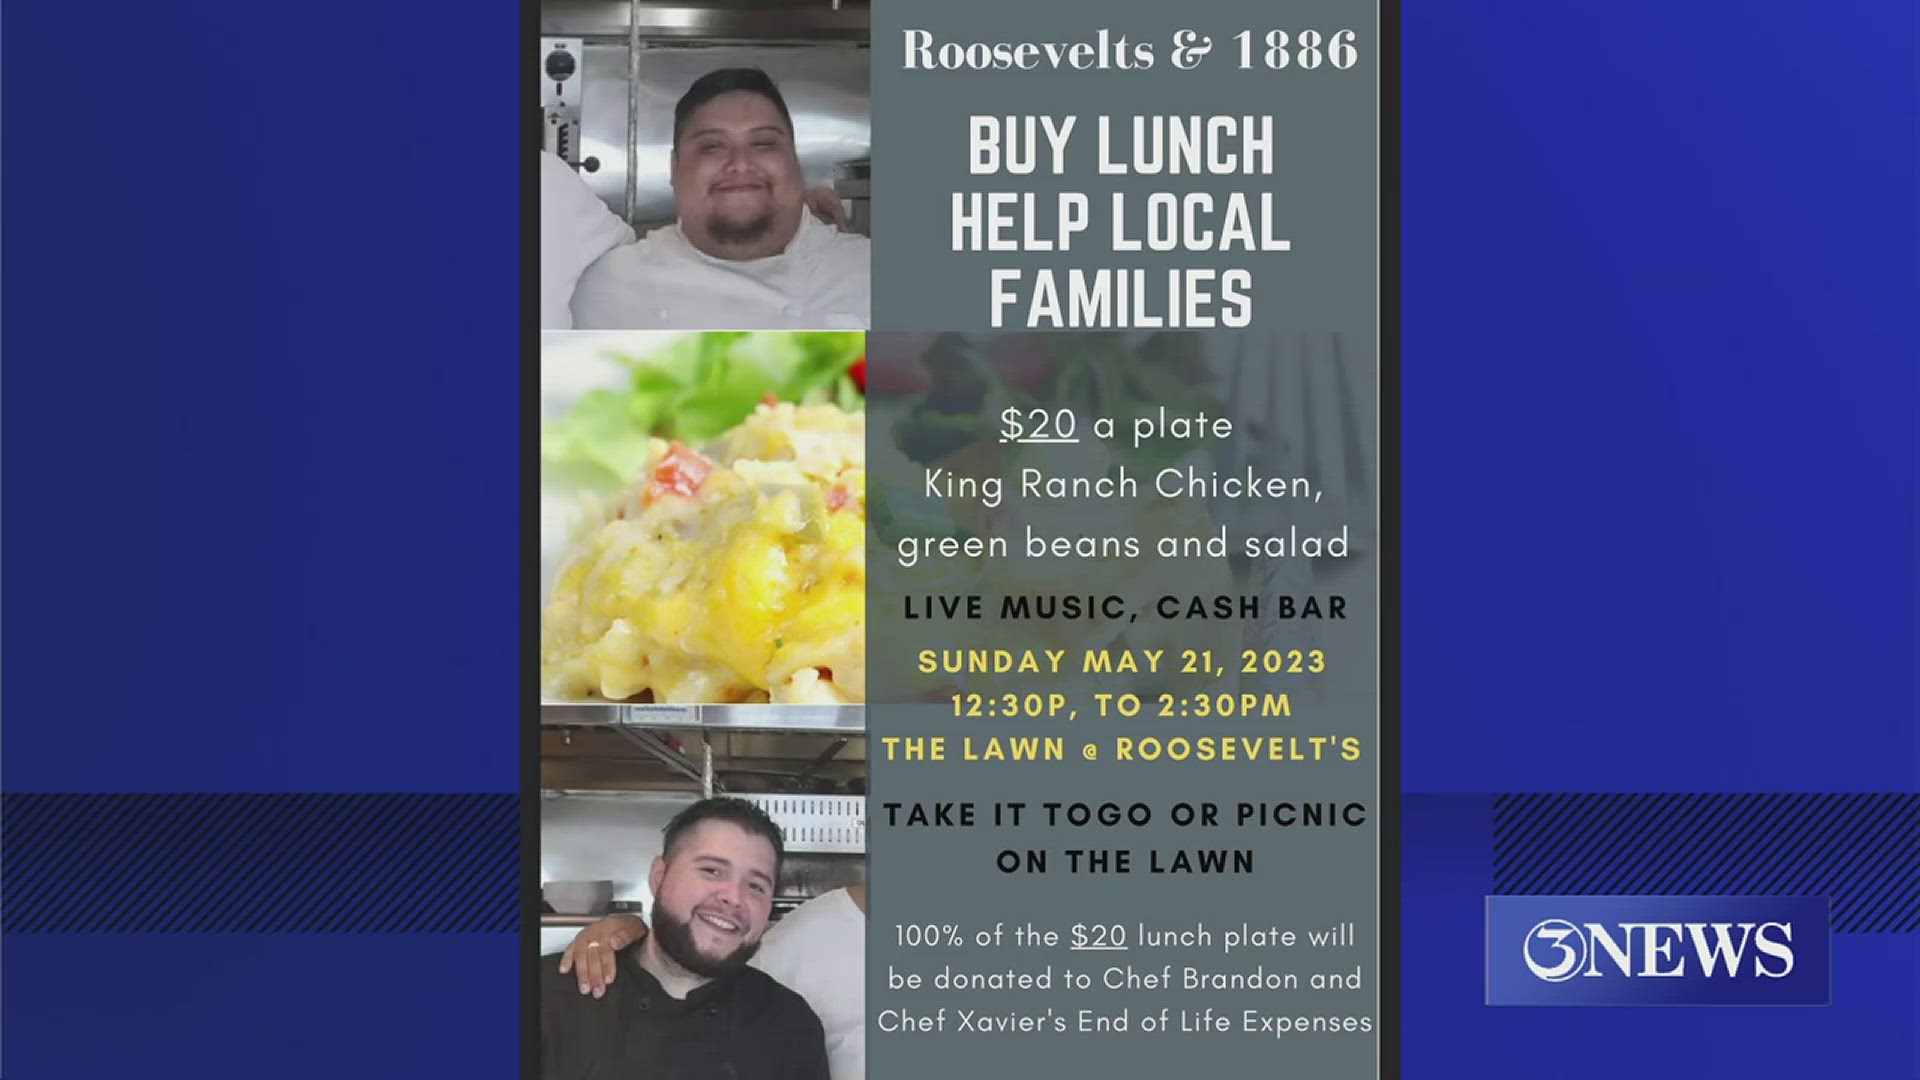 Brandon Barboza and Xxavier Marchus were chefs at Roosevelt's. The restaurant will be selling lunch plates to raise money for the two funerals.